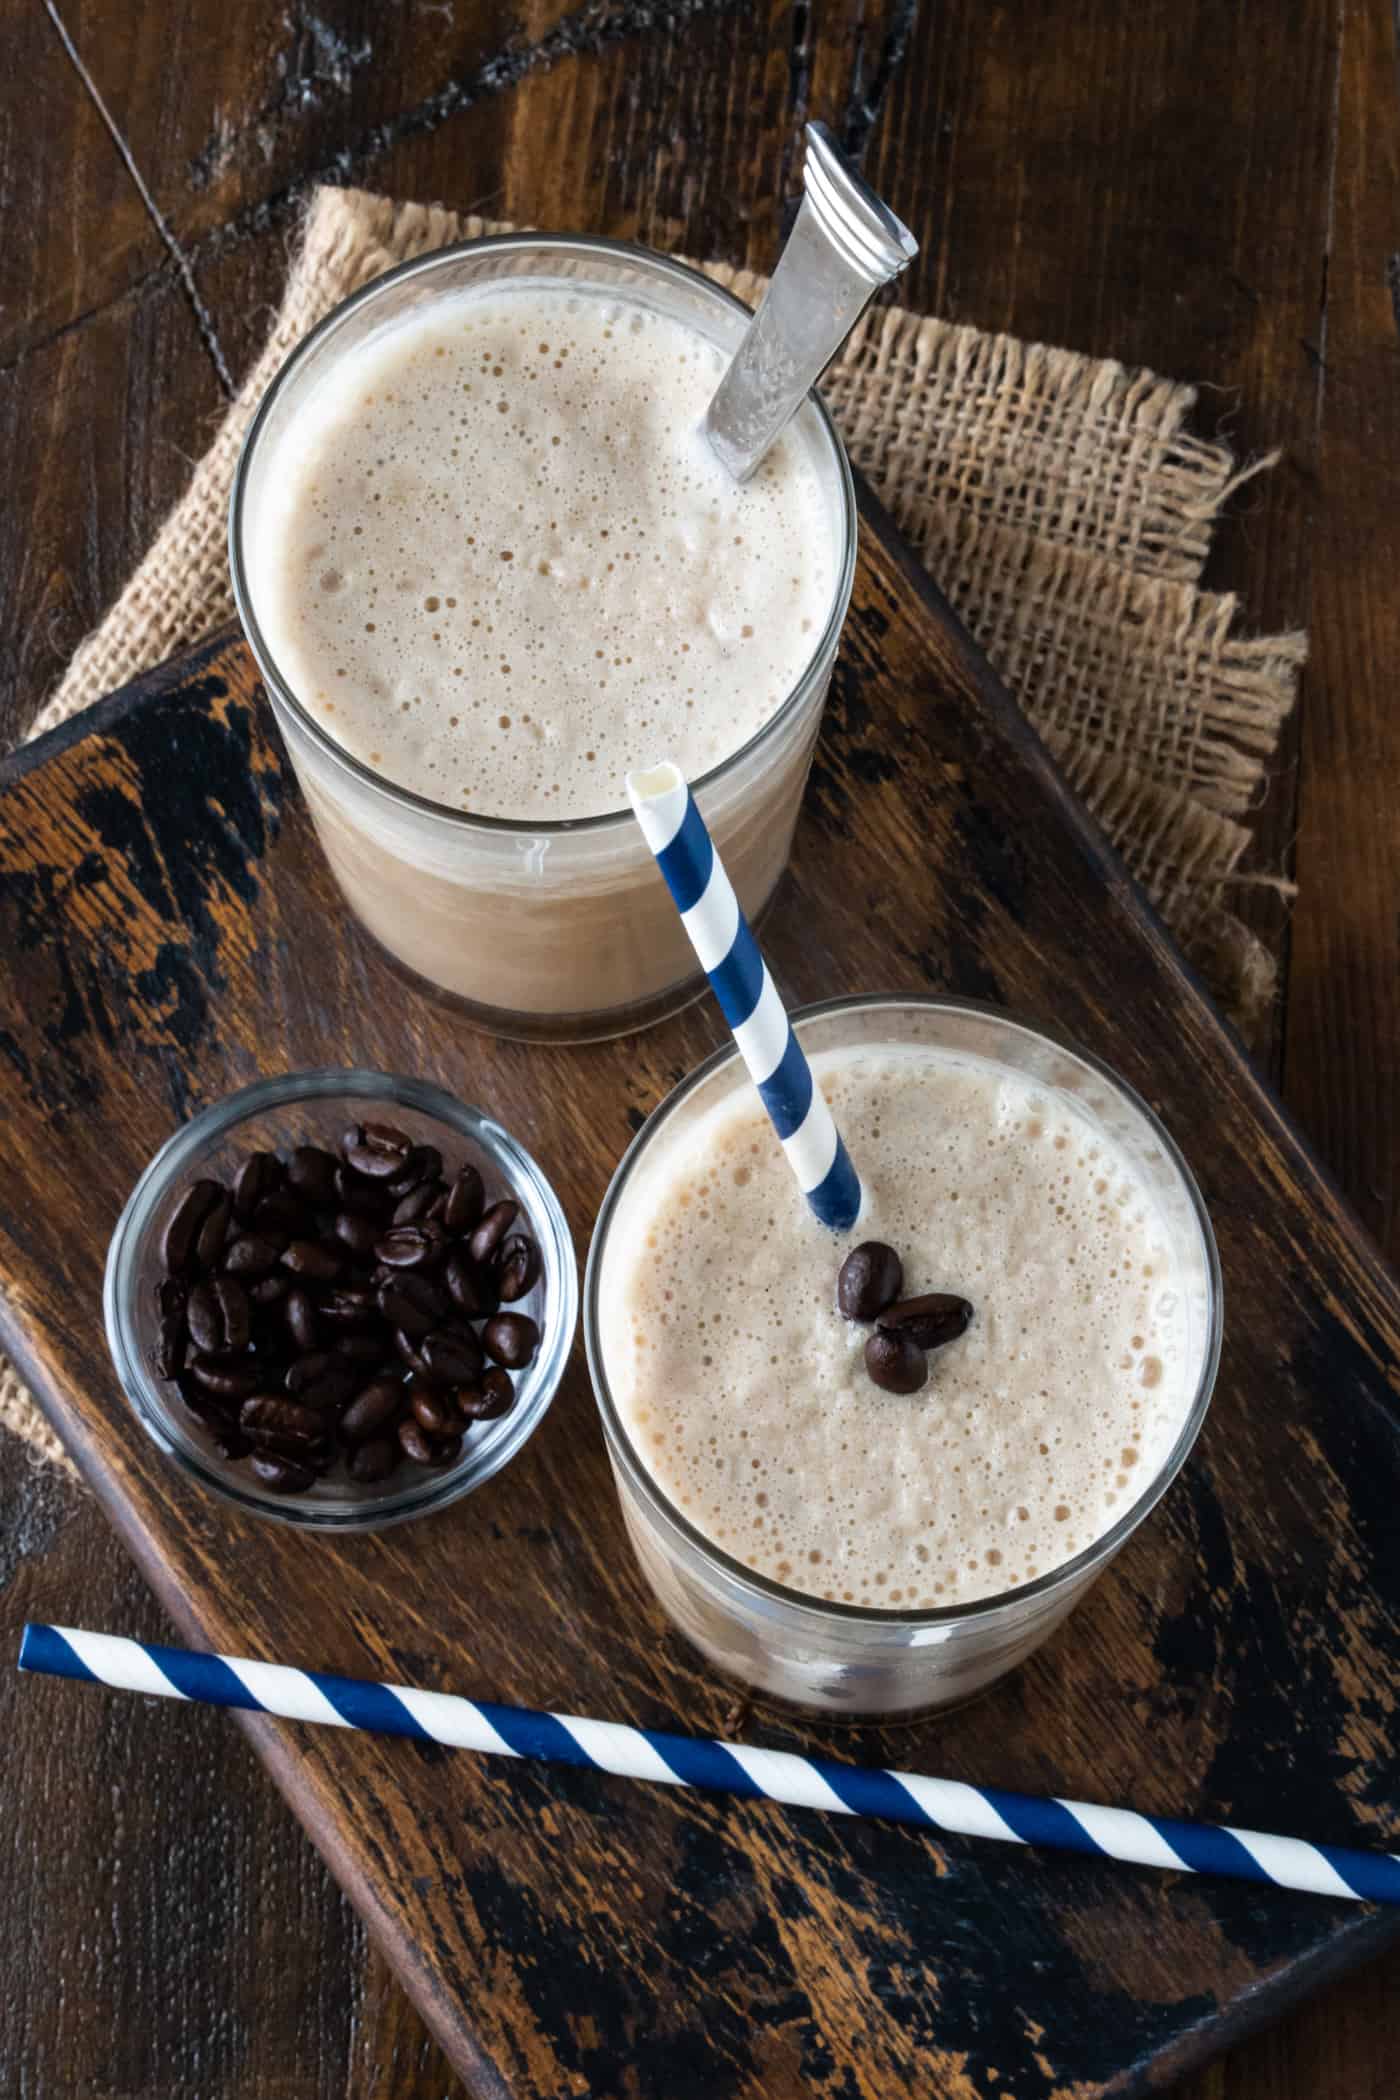  2 coffee smoothies in high ball glasses with a bowl of coffee beans for garnish.